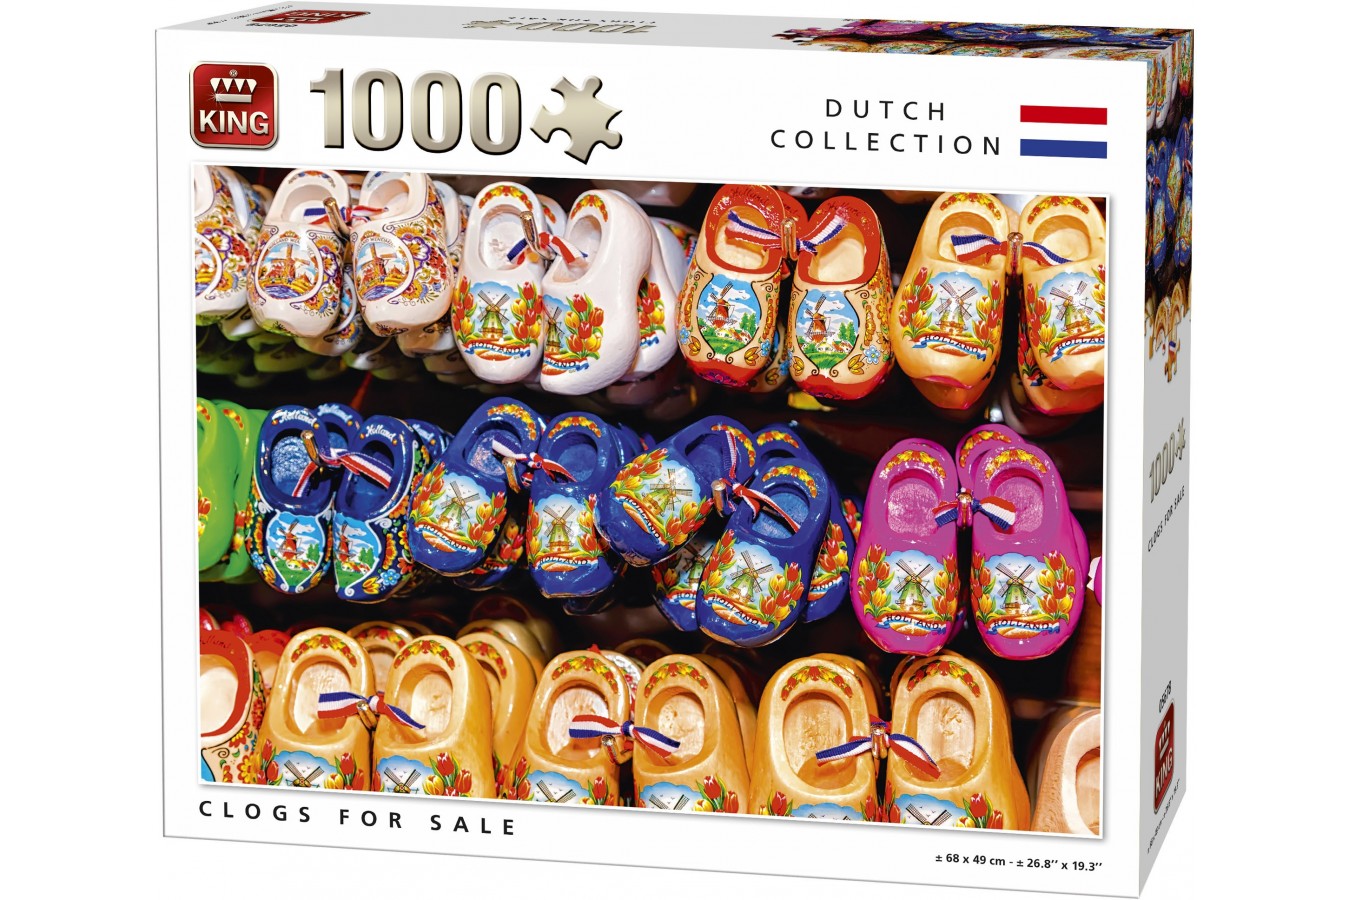 Puzzle King - Clogs for sale, 1.000 piese (05678) imagine